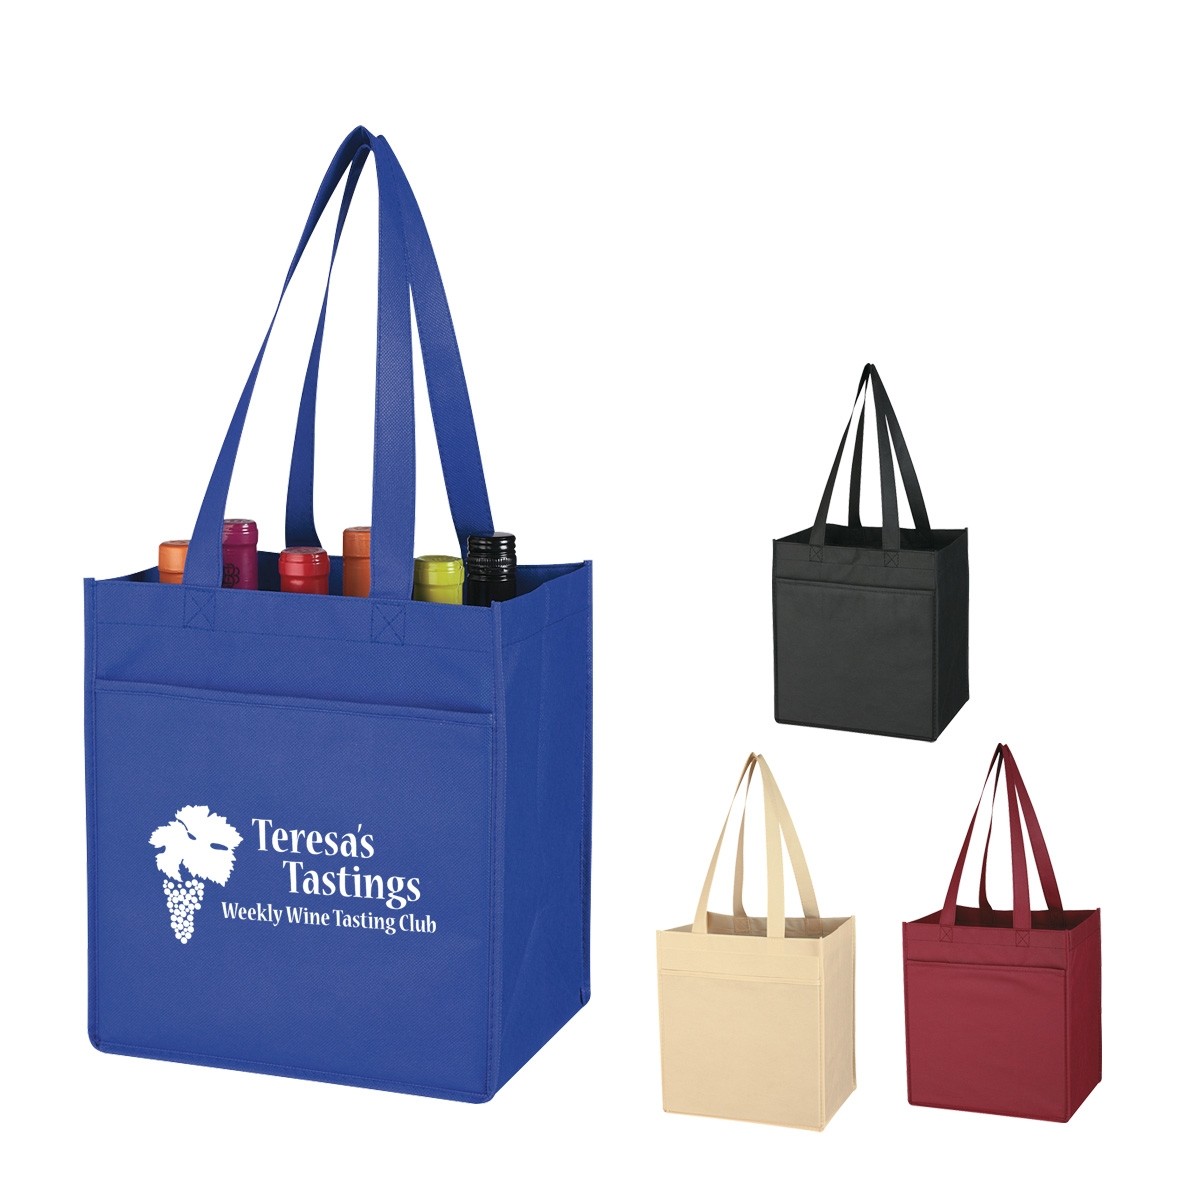 Promotional Non-Woven 6 Bottle Wine Tote Bag,Promotional Two Tone Shopping Tote Bags Supplier And Wholesaler